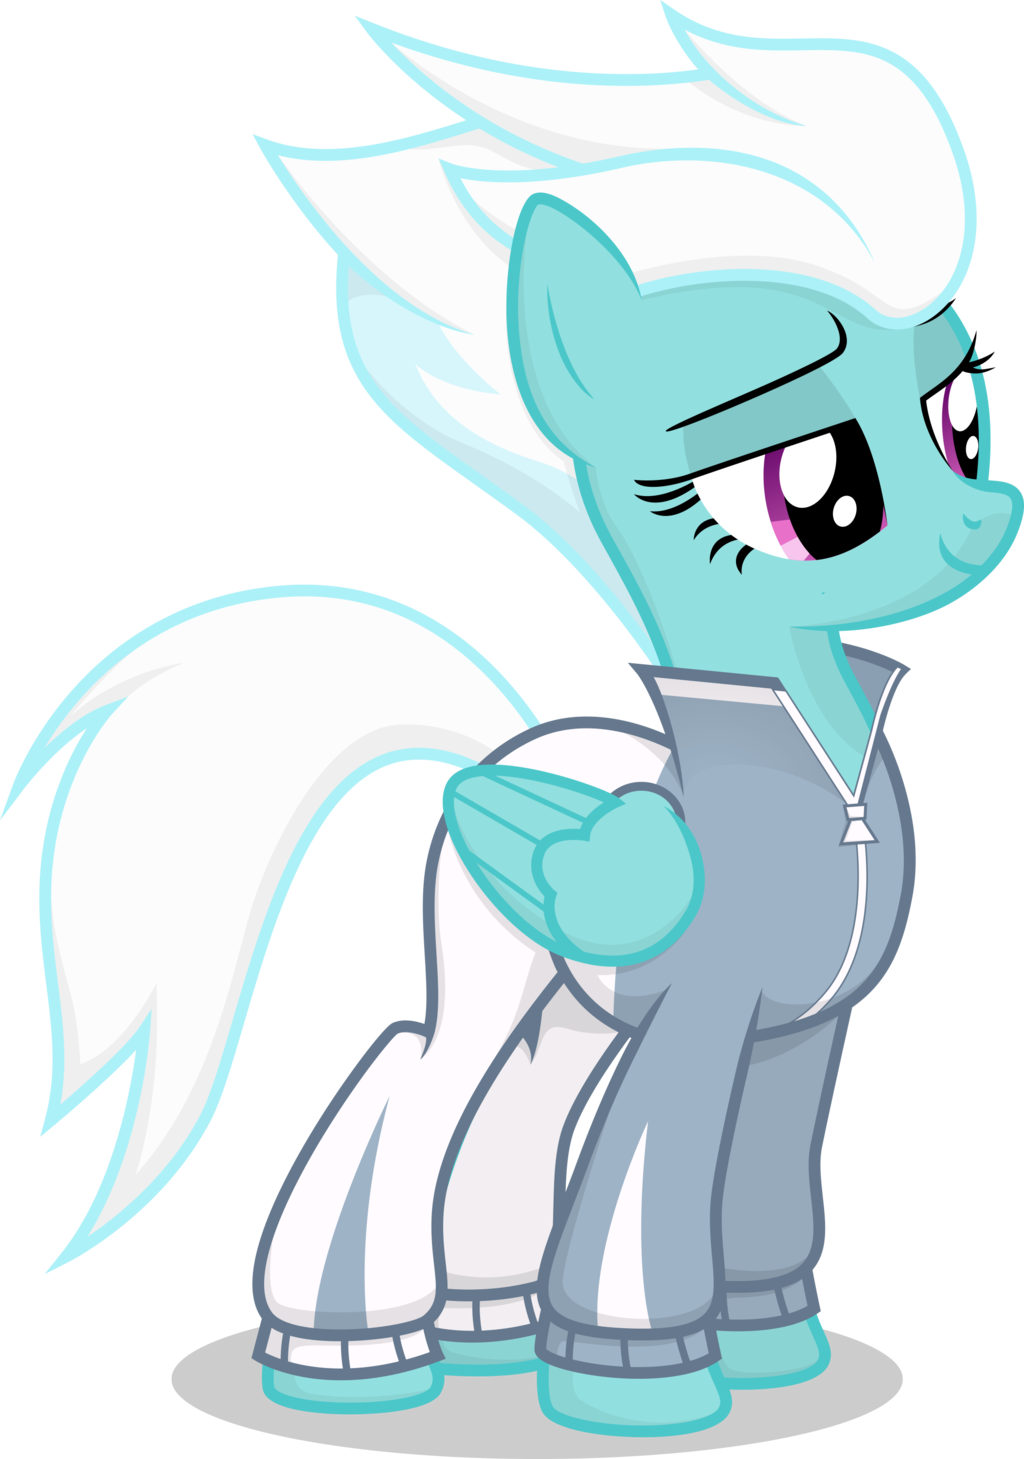 fleetfoot_by_stainless33-d7qd6aw.png